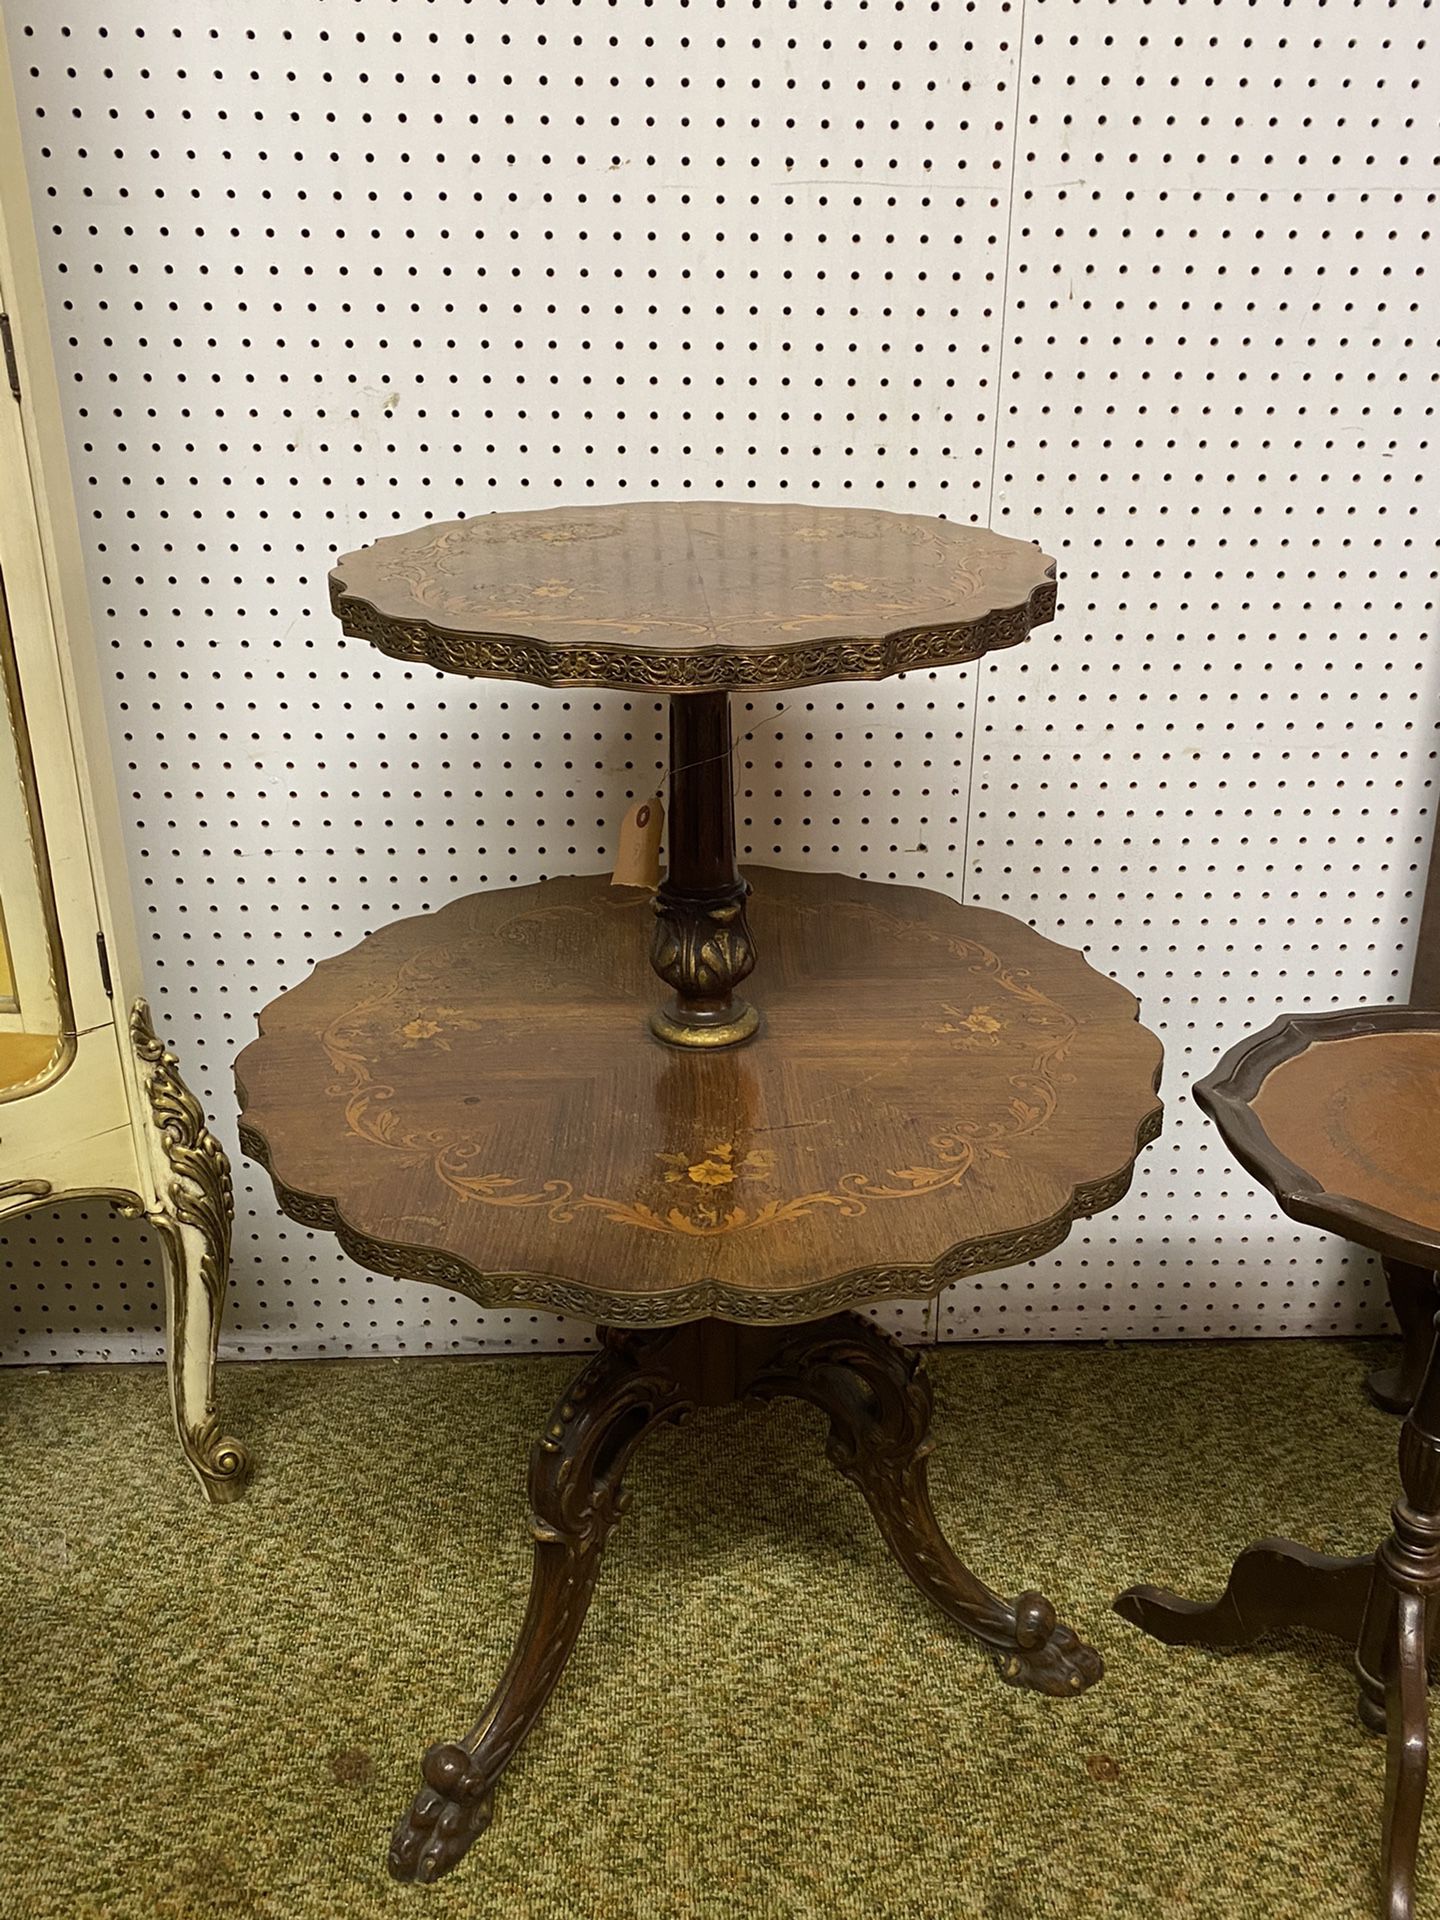 Antique Tiered claw foot Table with inlays